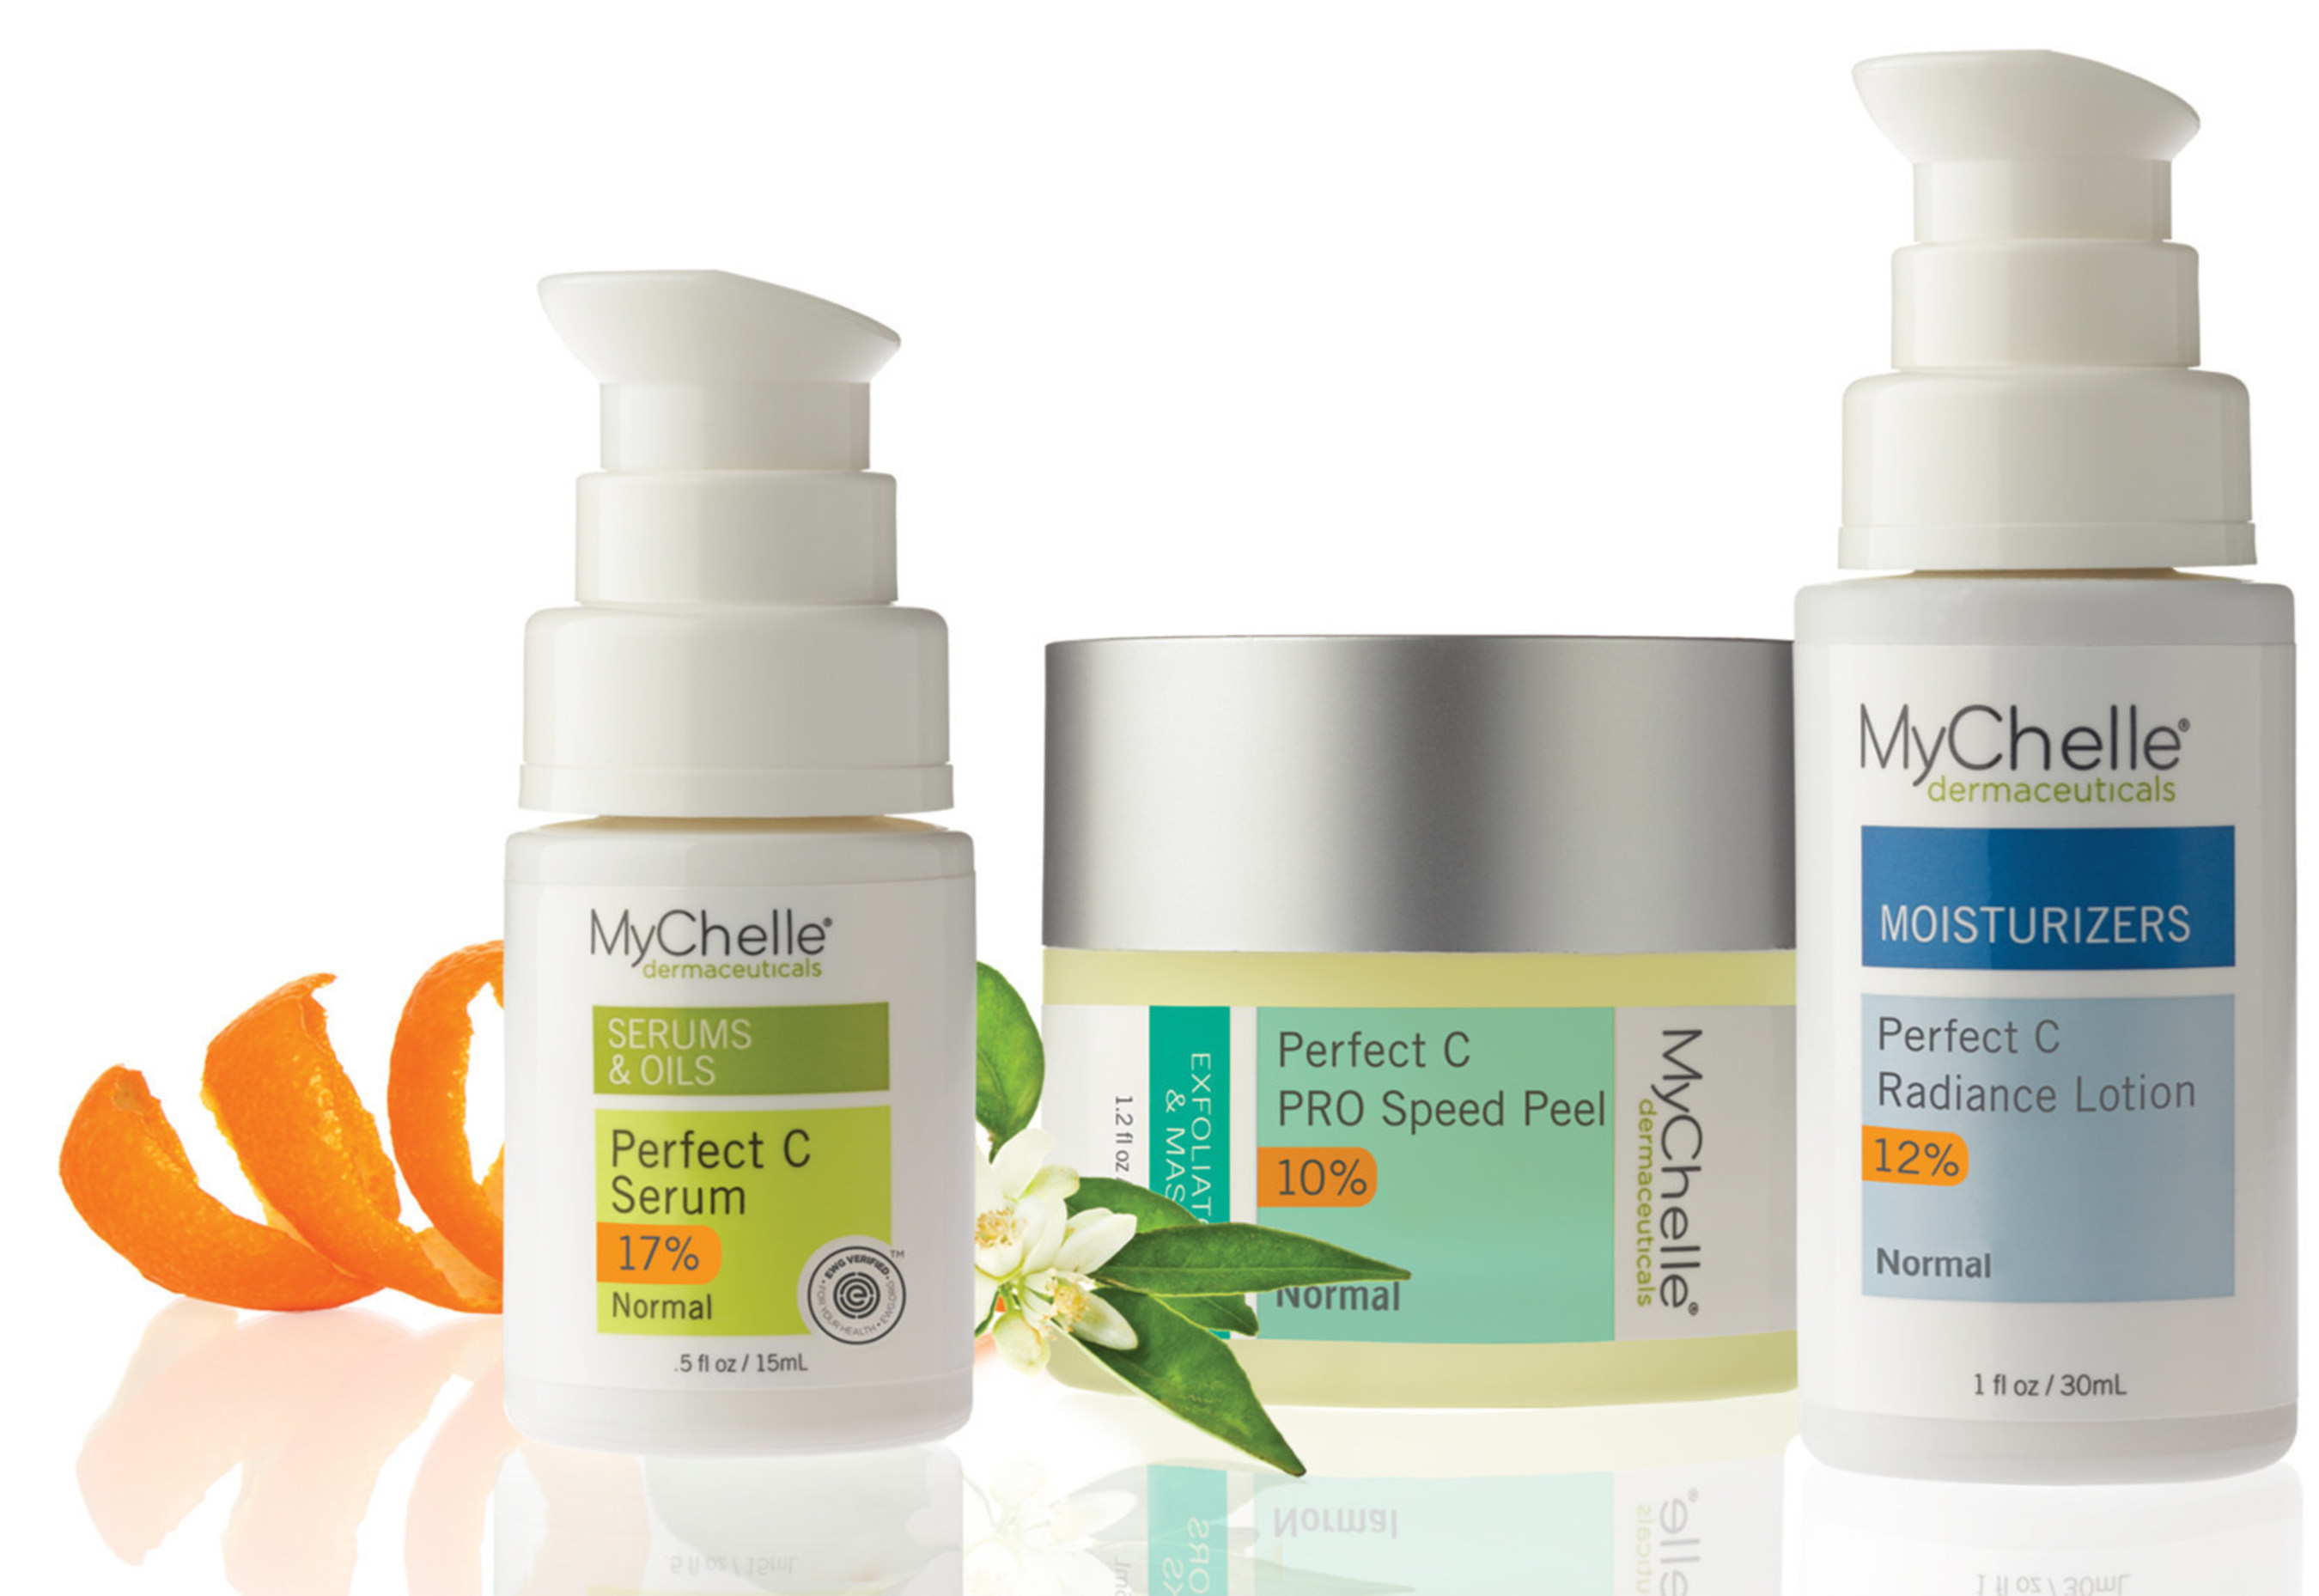 This week, national beauty brand MyChelle announces two advanced additions to its Perfect C(TM) system: Perfect C(TM) PRO Speed Peel and Perfect C(TM) Radiance Lotion. The most effective type of Vitamin C, L-Ascorbic Acid is the only active form available for use in skin care. This multi-tasking and transformative ingredient is also the only antioxidant able to enhance skin's natural renewal process; protect against environmental damage; and help reduce the appearance of dark spots and post-blemish discoloration. Learn more at www.mychelle.com